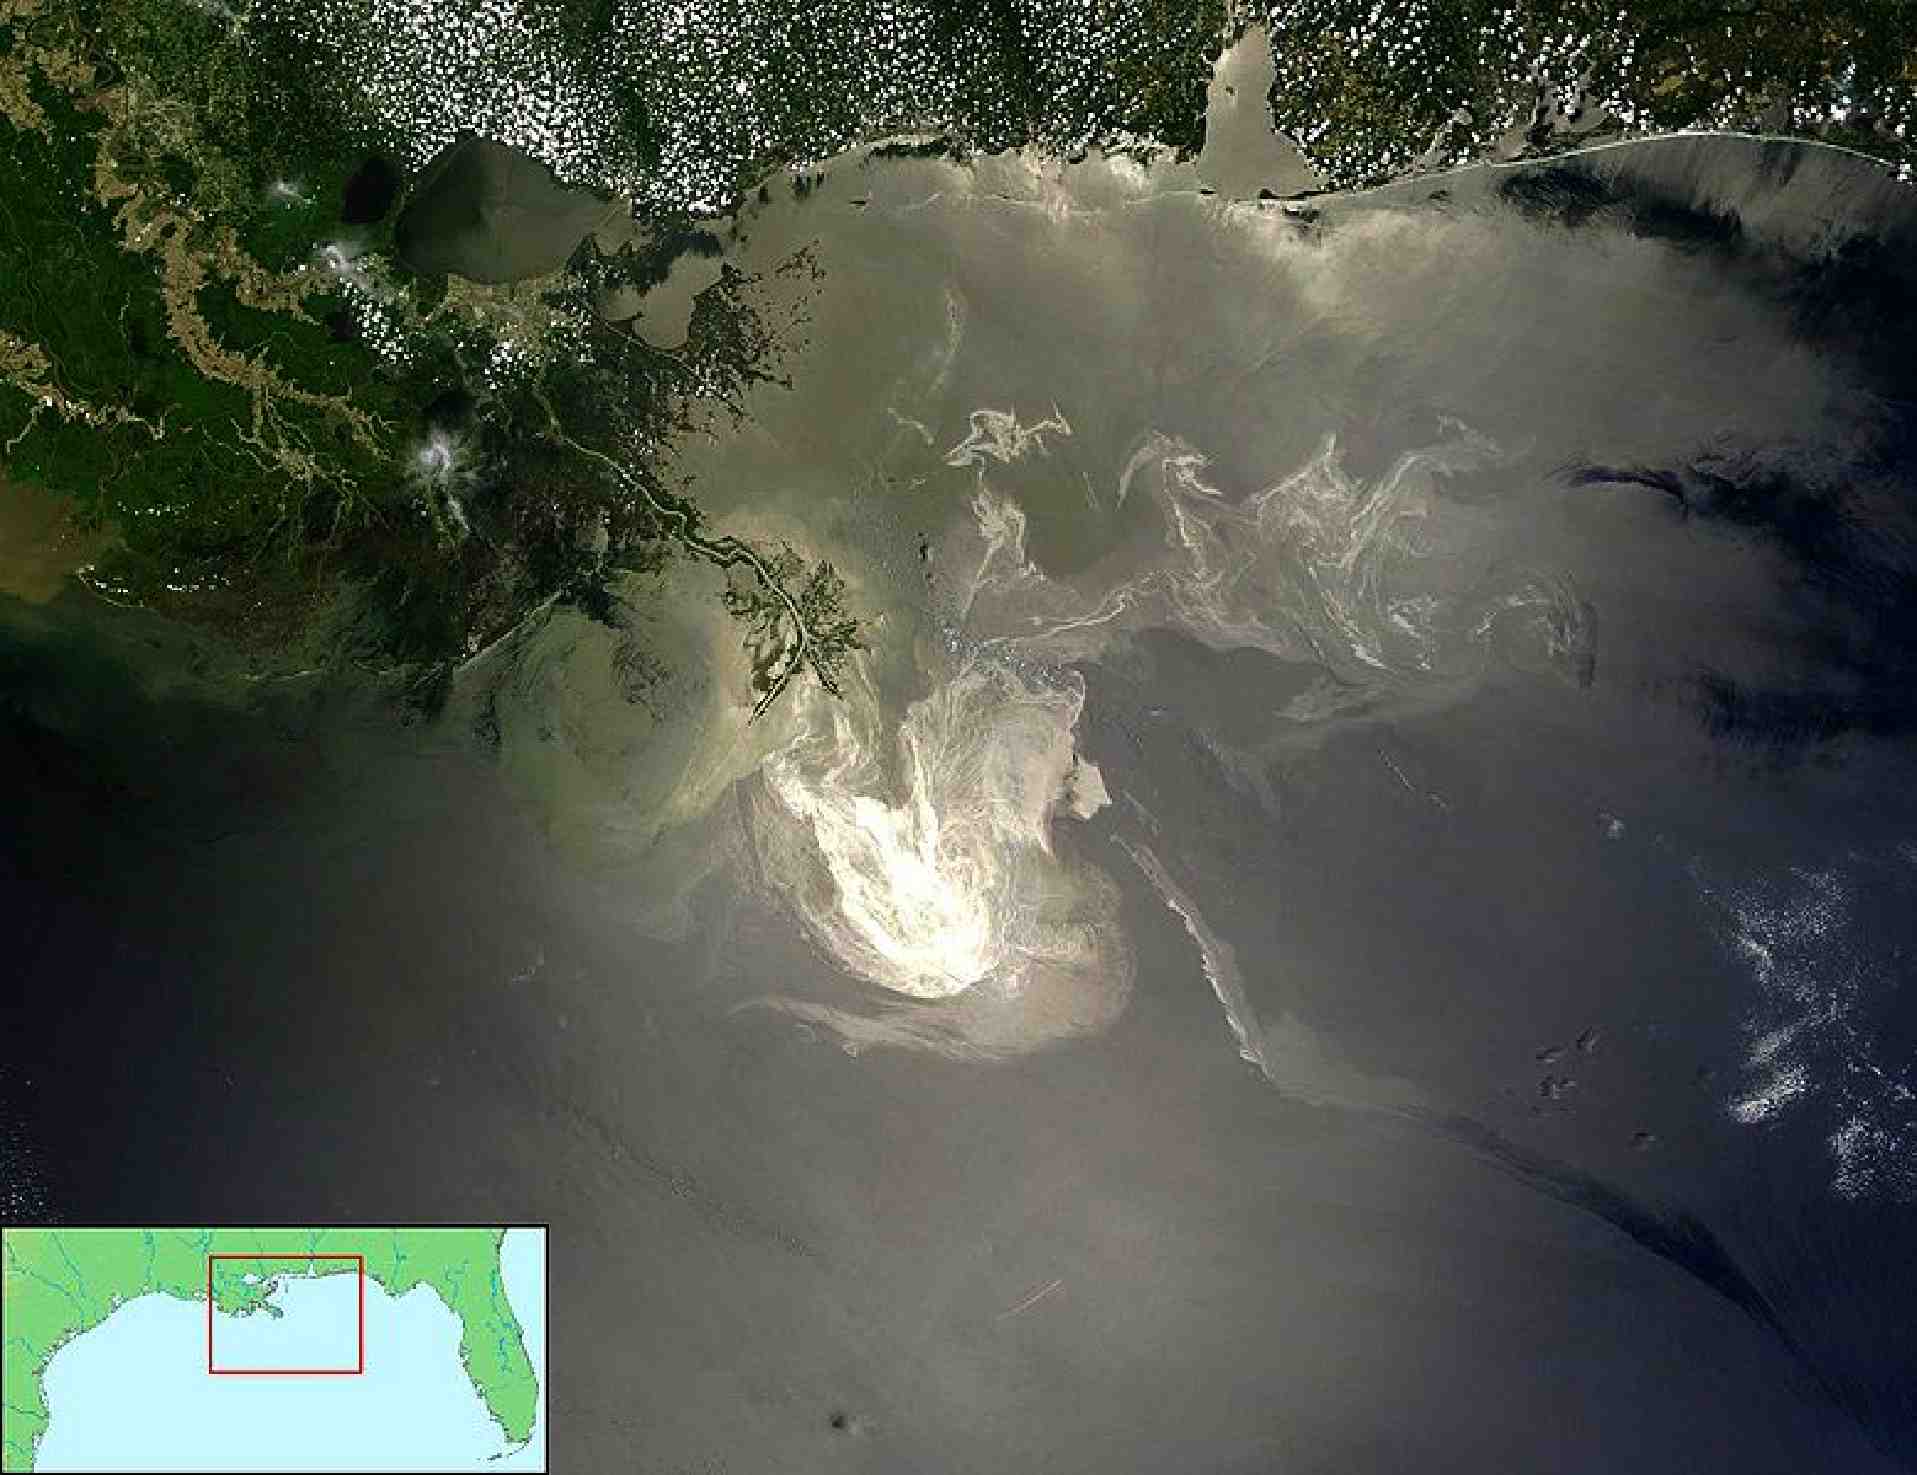 Image 2: MODIS sunglint imagery from May 24, 2010 with inlaid study area map for geographic reference. The oil is clearly seen as the shiny light-colored mass in the center.